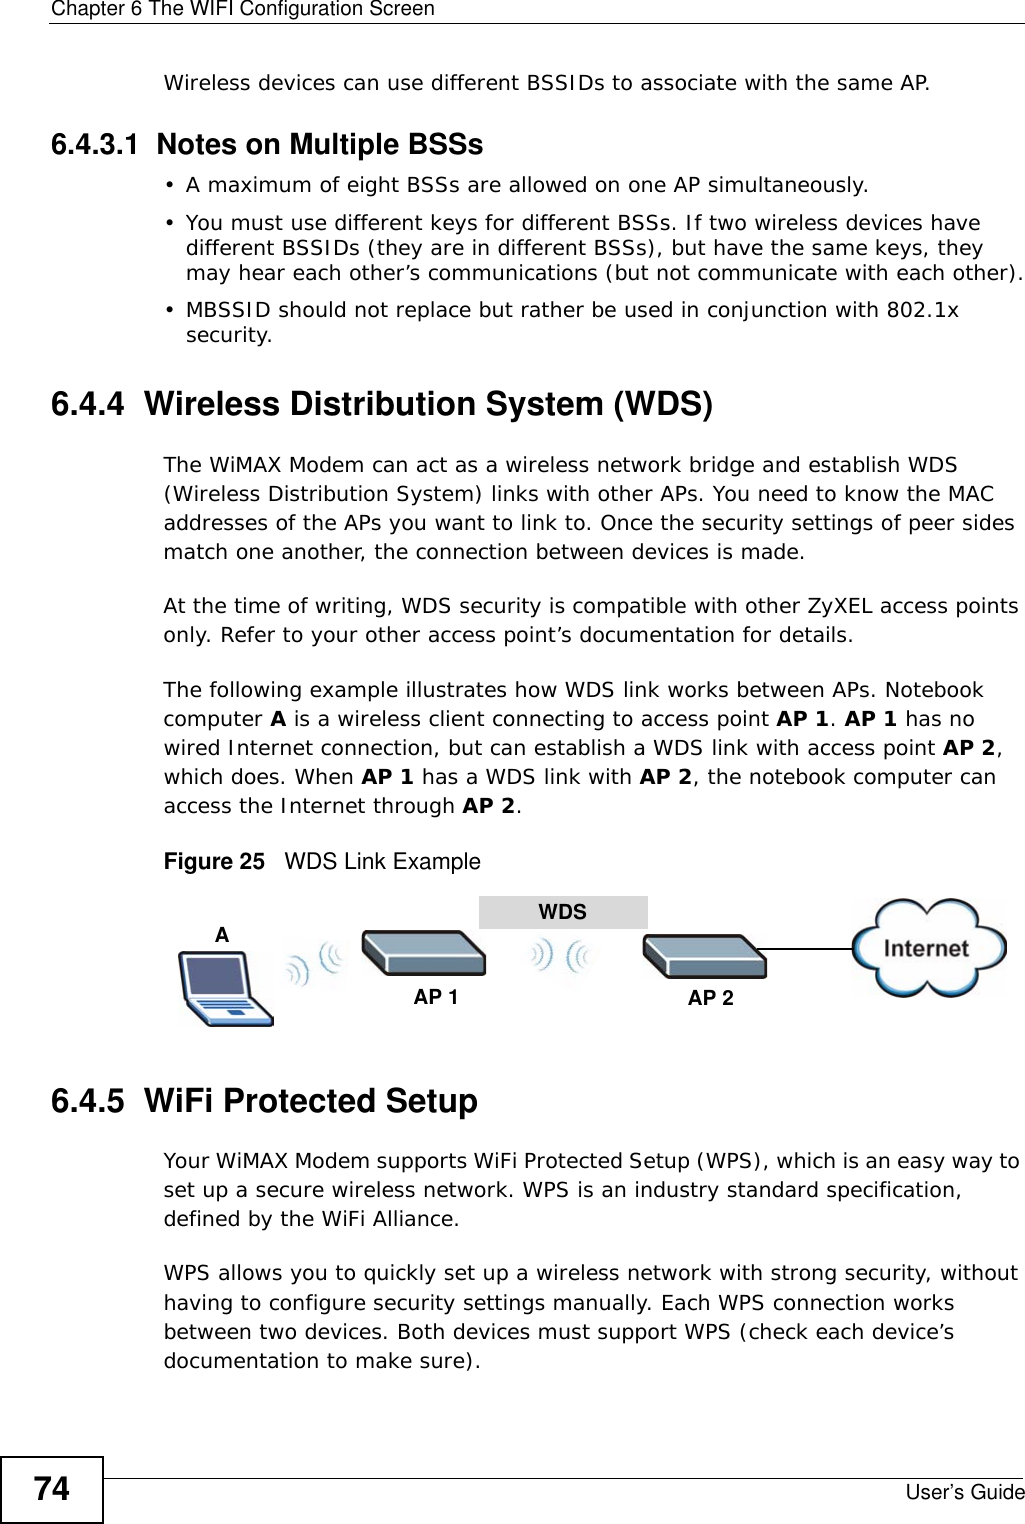 Chapter 6 The WIFI Configuration ScreenUser’s Guide74Wireless devices can use different BSSIDs to associate with the same AP.6.4.3.1  Notes on Multiple BSSs• A maximum of eight BSSs are allowed on one AP simultaneously.• You must use different keys for different BSSs. If two wireless devices have different BSSIDs (they are in different BSSs), but have the same keys, they may hear each other’s communications (but not communicate with each other).• MBSSID should not replace but rather be used in conjunction with 802.1x security.6.4.4  Wireless Distribution System (WDS)The WiMAX Modem can act as a wireless network bridge and establish WDS (Wireless Distribution System) links with other APs. You need to know the MAC addresses of the APs you want to link to. Once the security settings of peer sides match one another, the connection between devices is made.At the time of writing, WDS security is compatible with other ZyXEL access points only. Refer to your other access point’s documentation for details.The following example illustrates how WDS link works between APs. Notebook computer A is a wireless client connecting to access point AP 1. AP 1 has no wired Internet connection, but can establish a WDS link with access point AP 2, which does. When AP 1 has a WDS link with AP 2, the notebook computer can access the Internet through AP 2.Figure 25   WDS Link Example6.4.5  WiFi Protected SetupYour WiMAX Modem supports WiFi Protected Setup (WPS), which is an easy way to set up a secure wireless network. WPS is an industry standard specification, defined by the WiFi Alliance.WPS allows you to quickly set up a wireless network with strong security, without having to configure security settings manually. Each WPS connection works between two devices. Both devices must support WPS (check each device’s documentation to make sure). WDSAP 2AP 1A